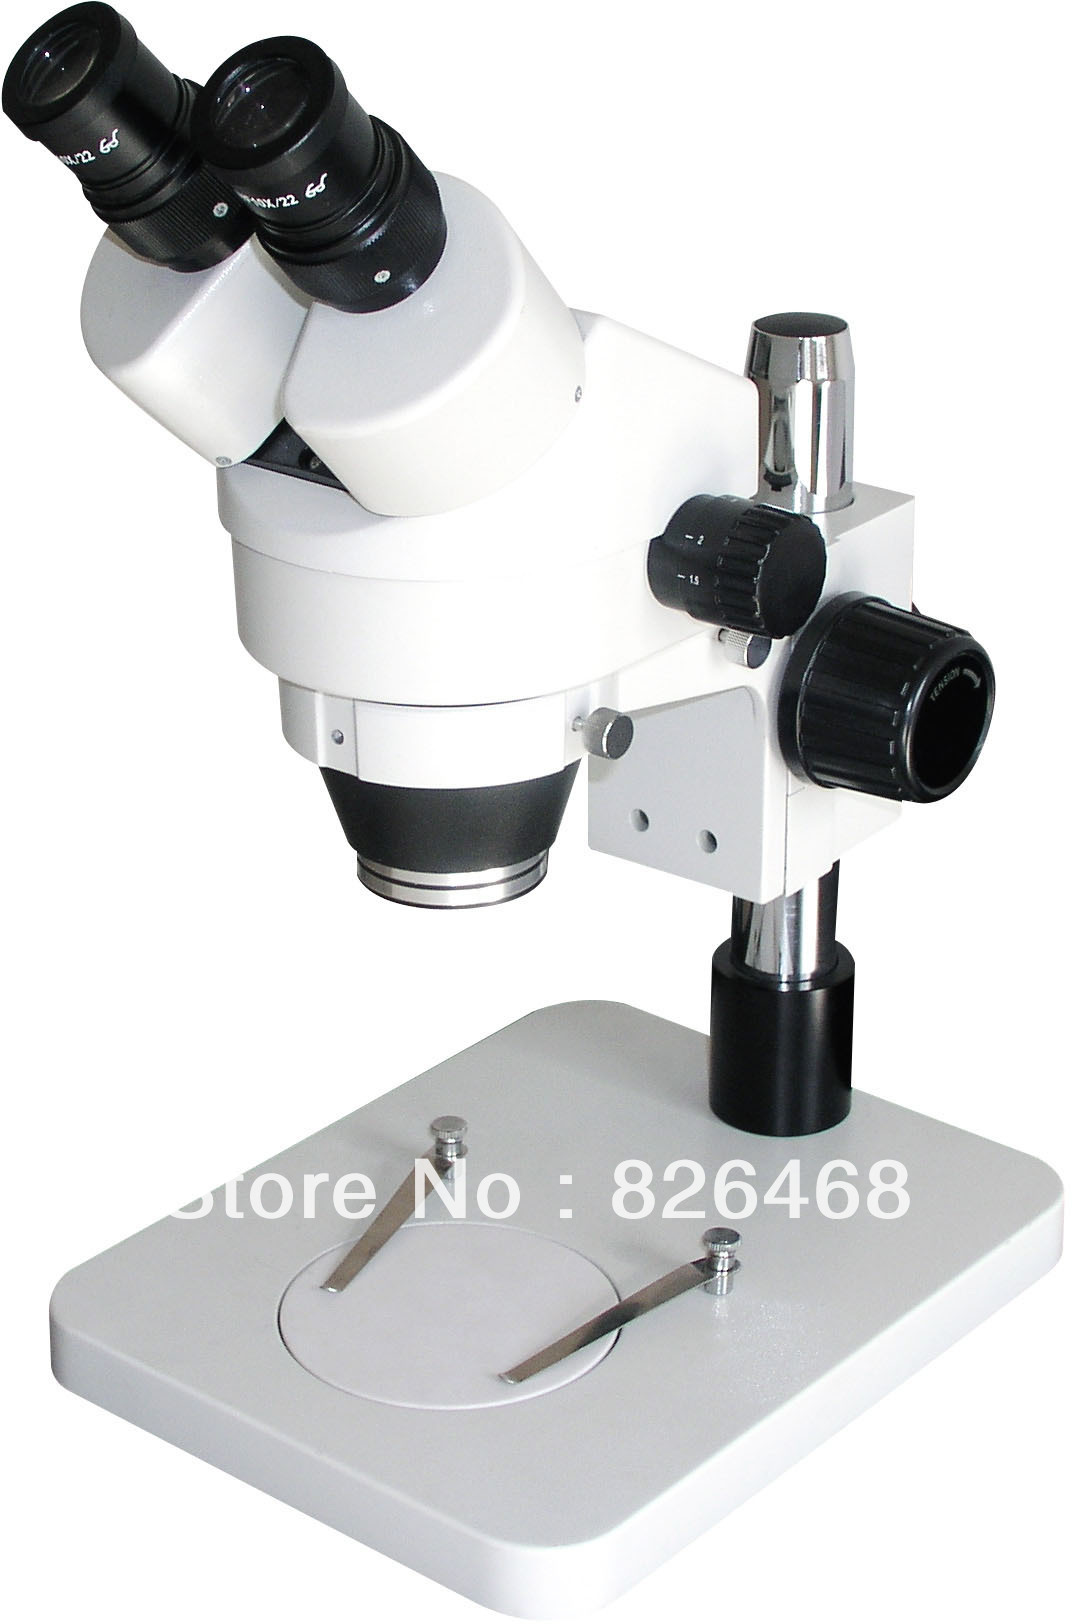 Binocular Microscope Parts And Functions